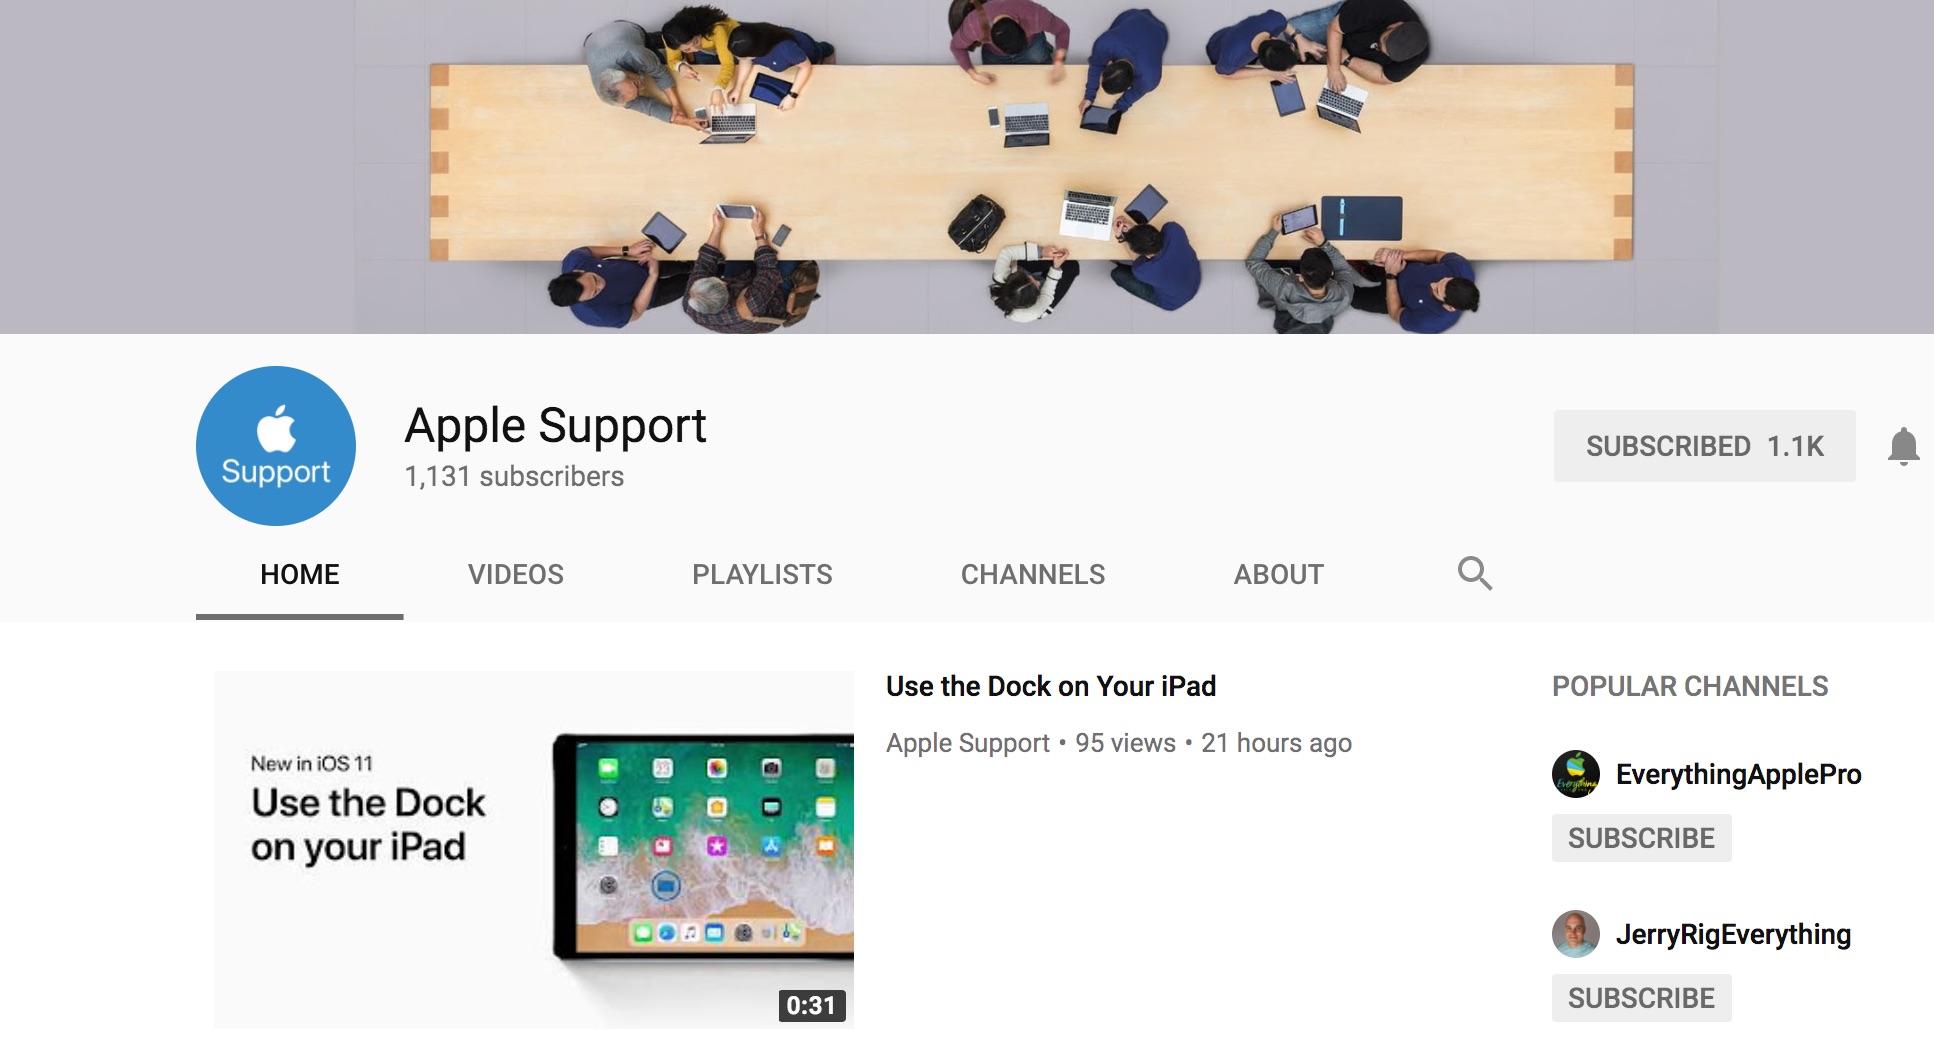 Apple Support YouTube Channel Launches Features iOS Tips and Tricks